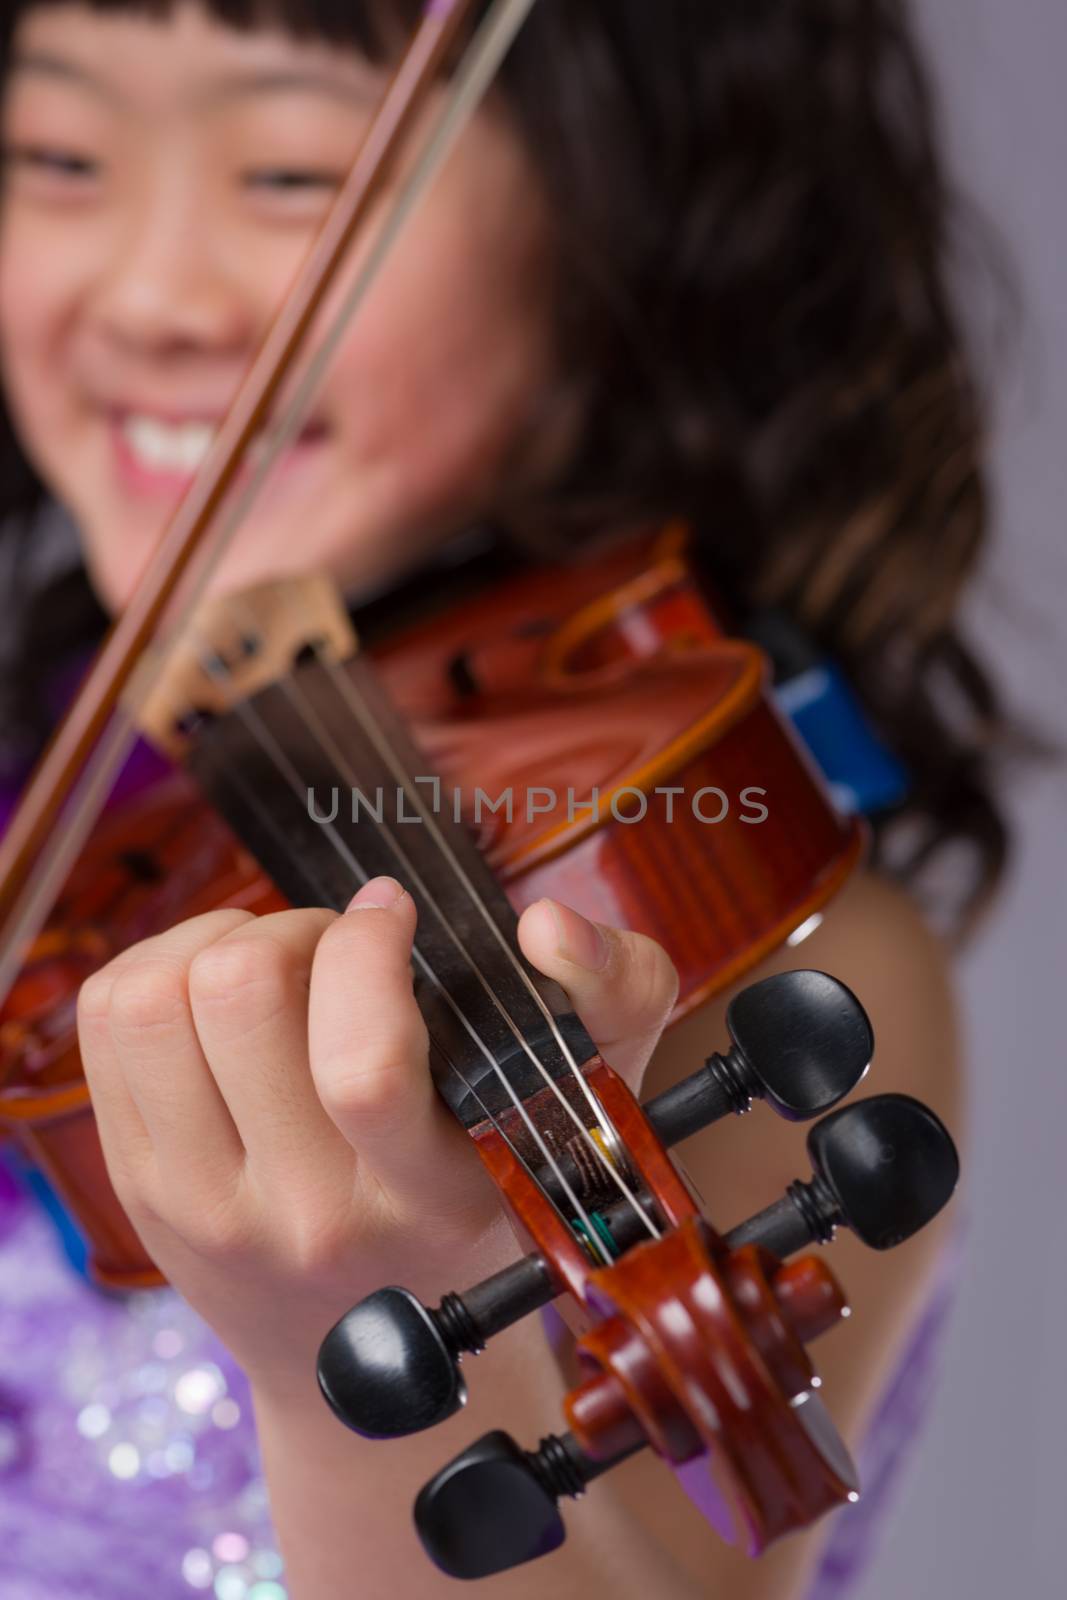 A portrait of a cute, happy and young Japanese girl in a purple dress with a violin with the focus on her hand instead of her face.